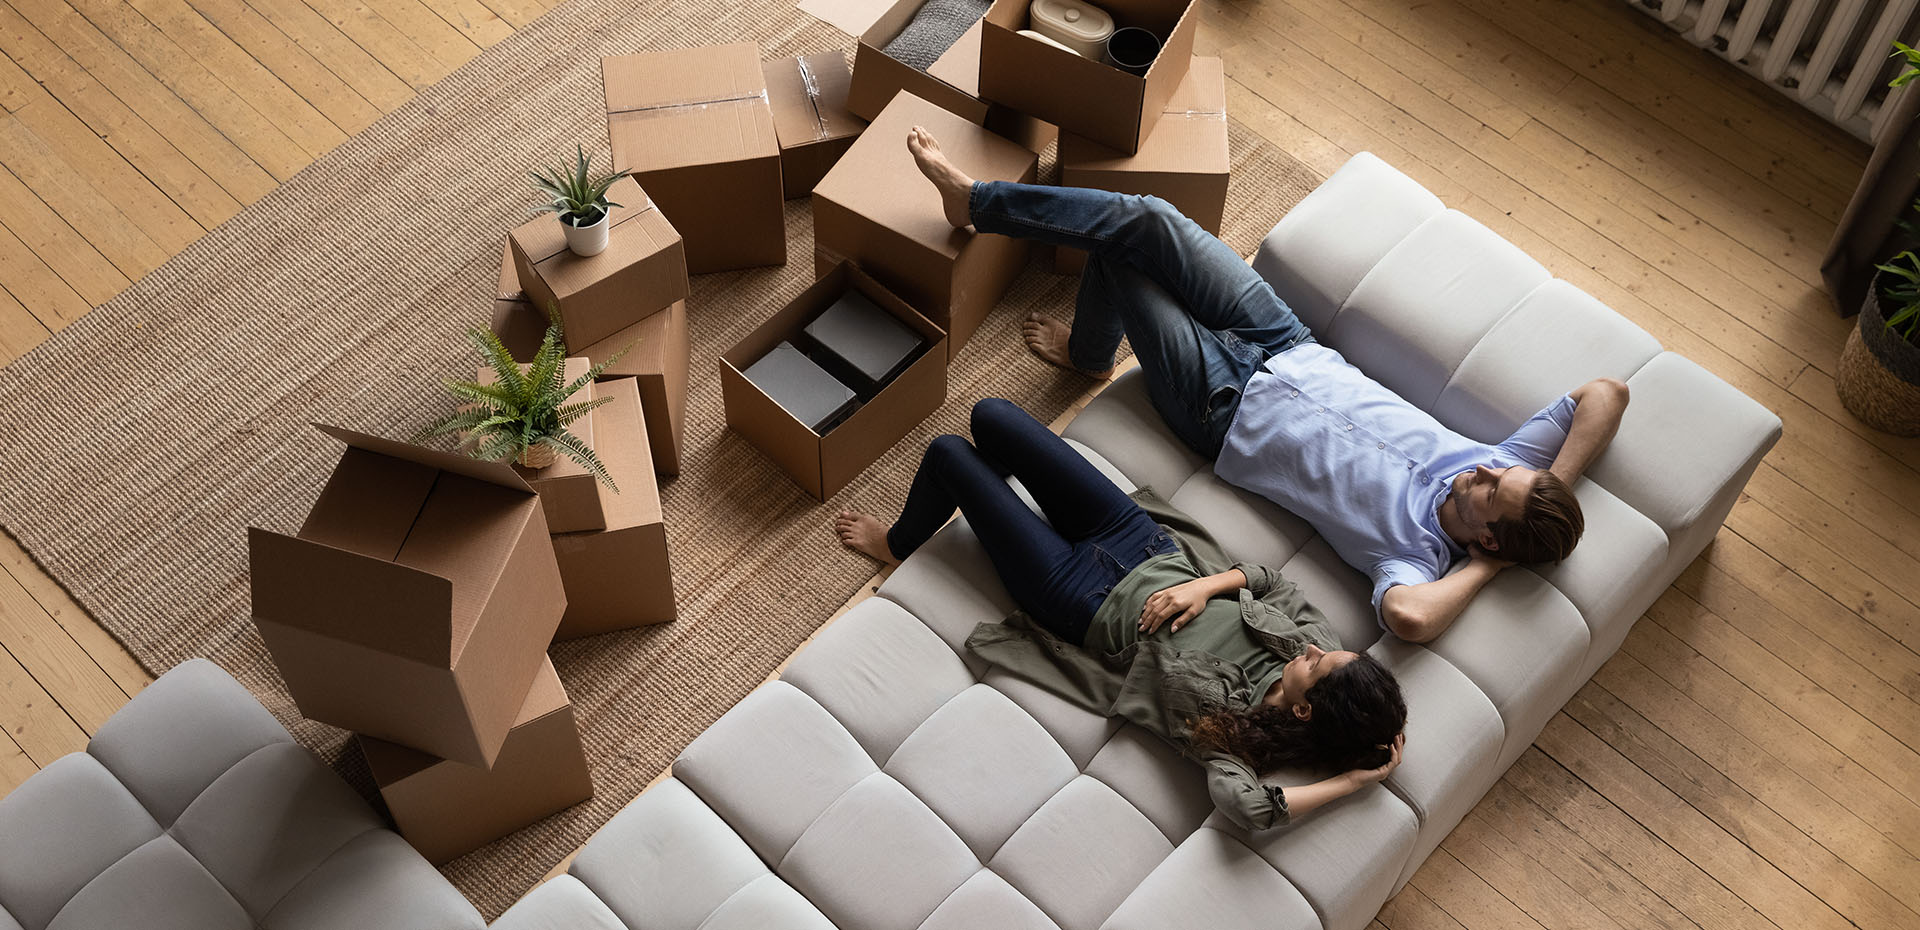 Image showing a couple sitting on the couch surrounded by boxes